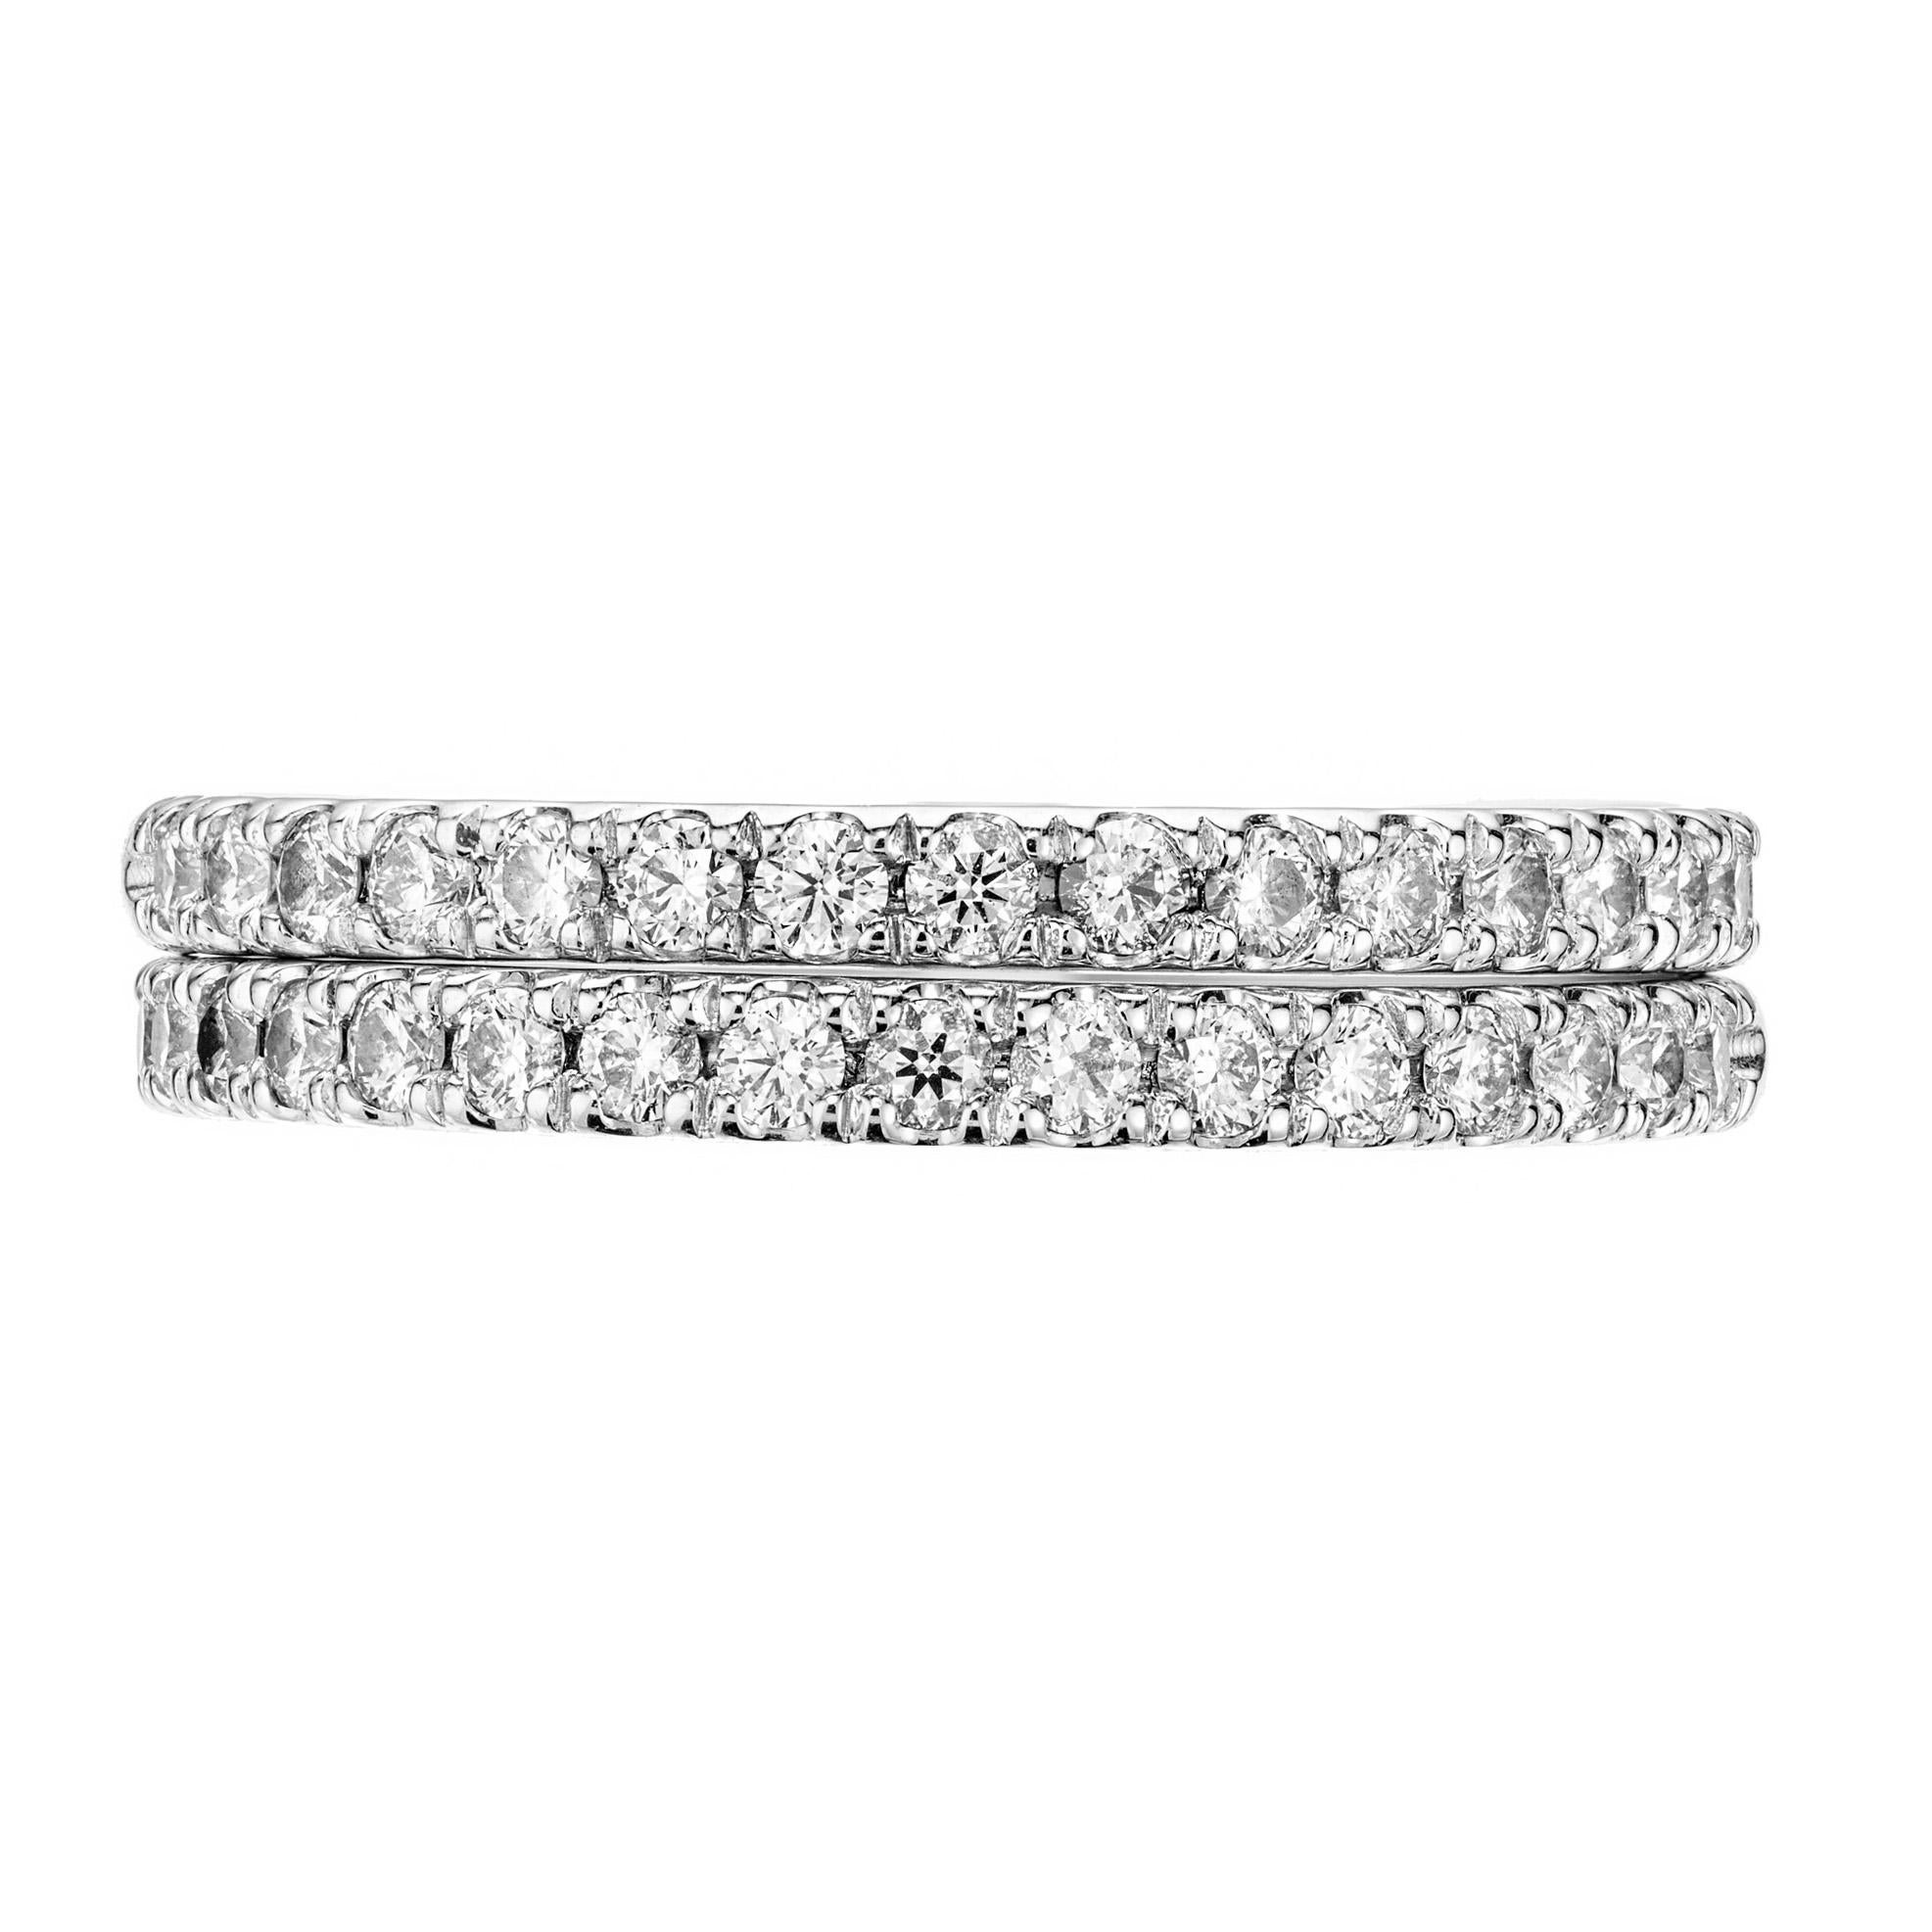 Double diamond wedding band rings. 34 round cut diamonds H-I (Near colorless) color and VS-SI clarity total weight .60cts. Set in two platinum settings. These rings came along with a Hearts on Fire engagement ring that we have listed, however the